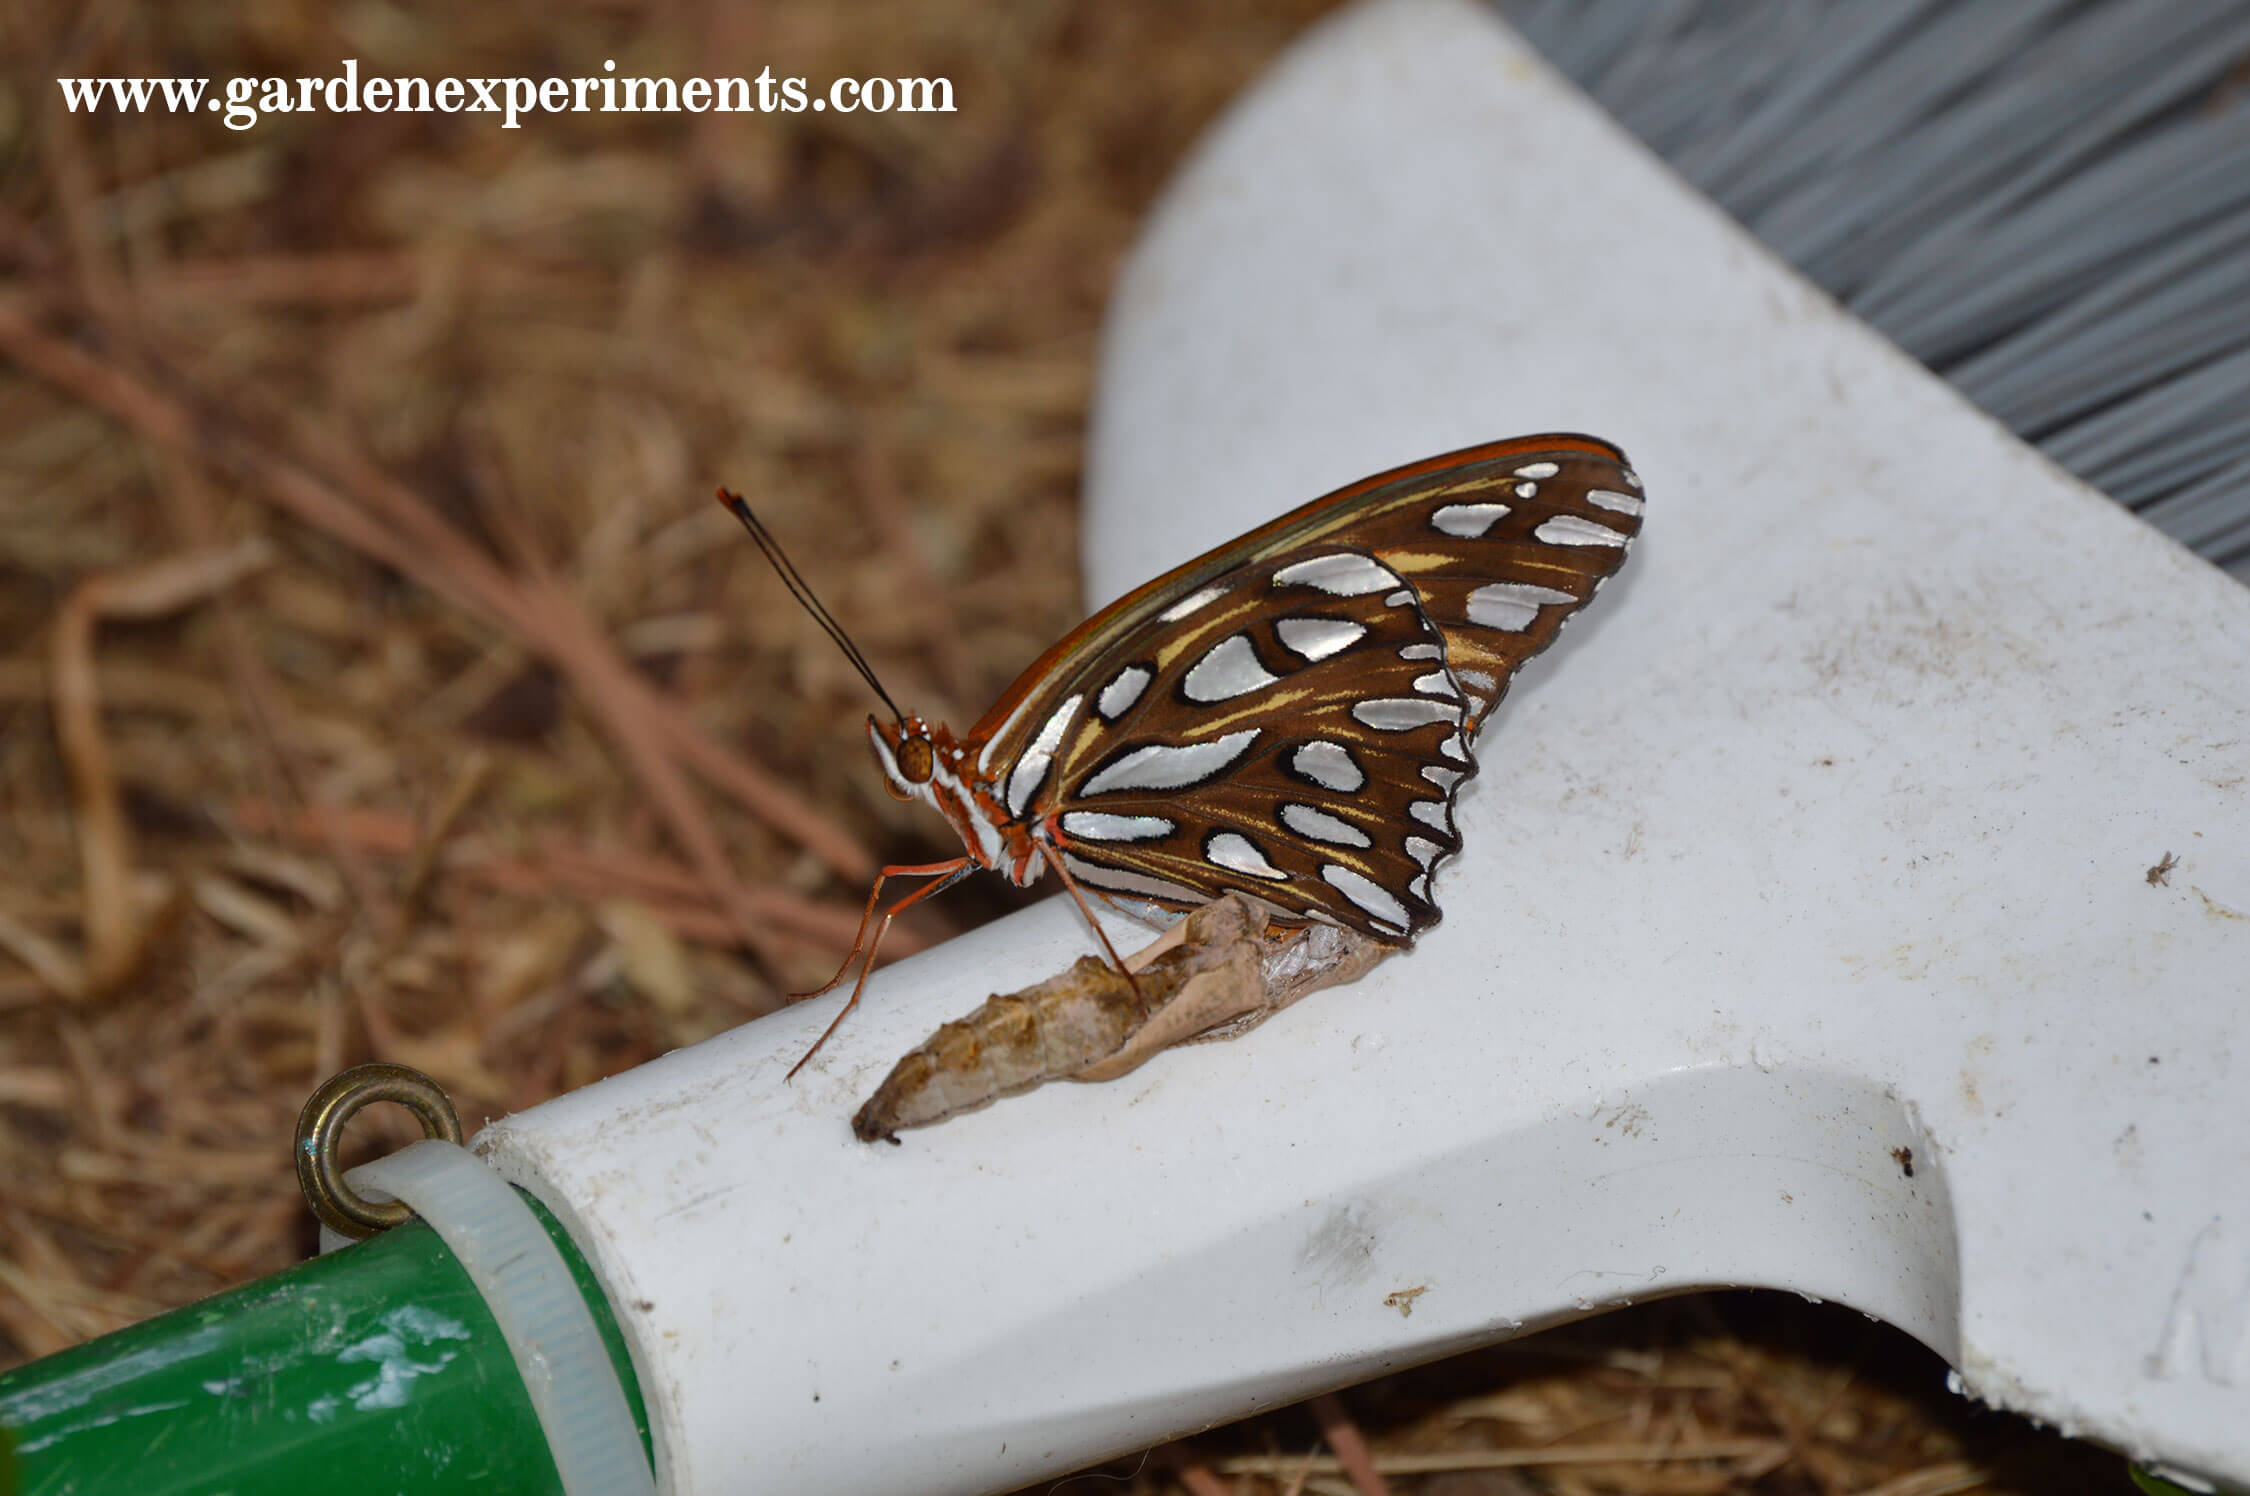 Gulf Fritillary butterfly that just emerged from its cocoon